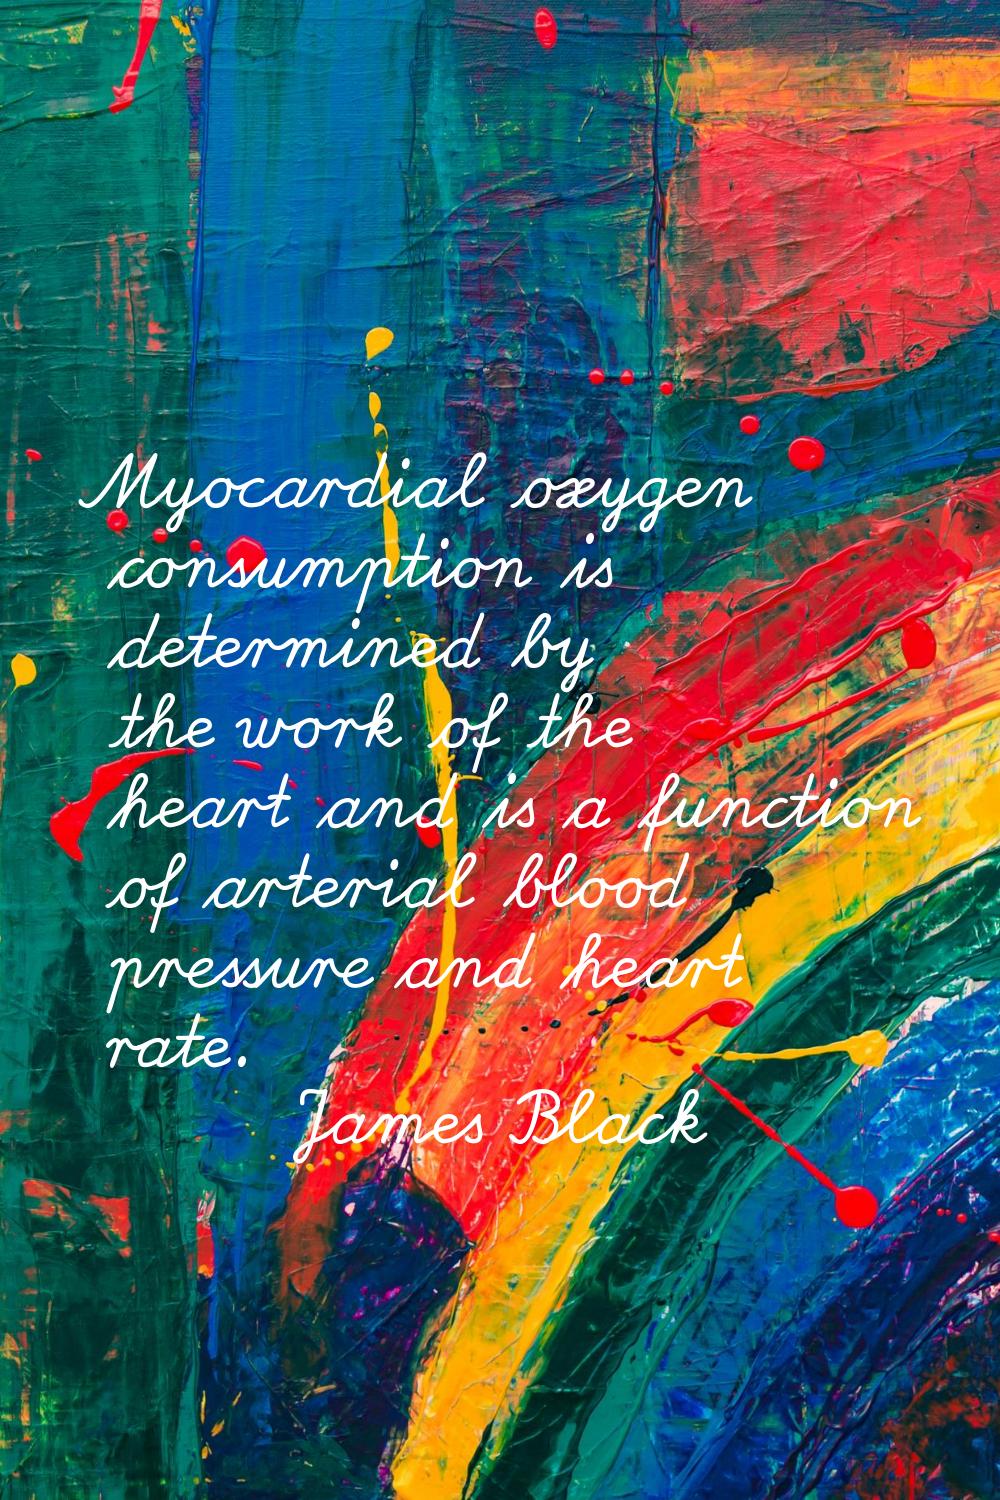 Myocardial oxygen consumption is determined by the work of the heart and is a function of arterial 